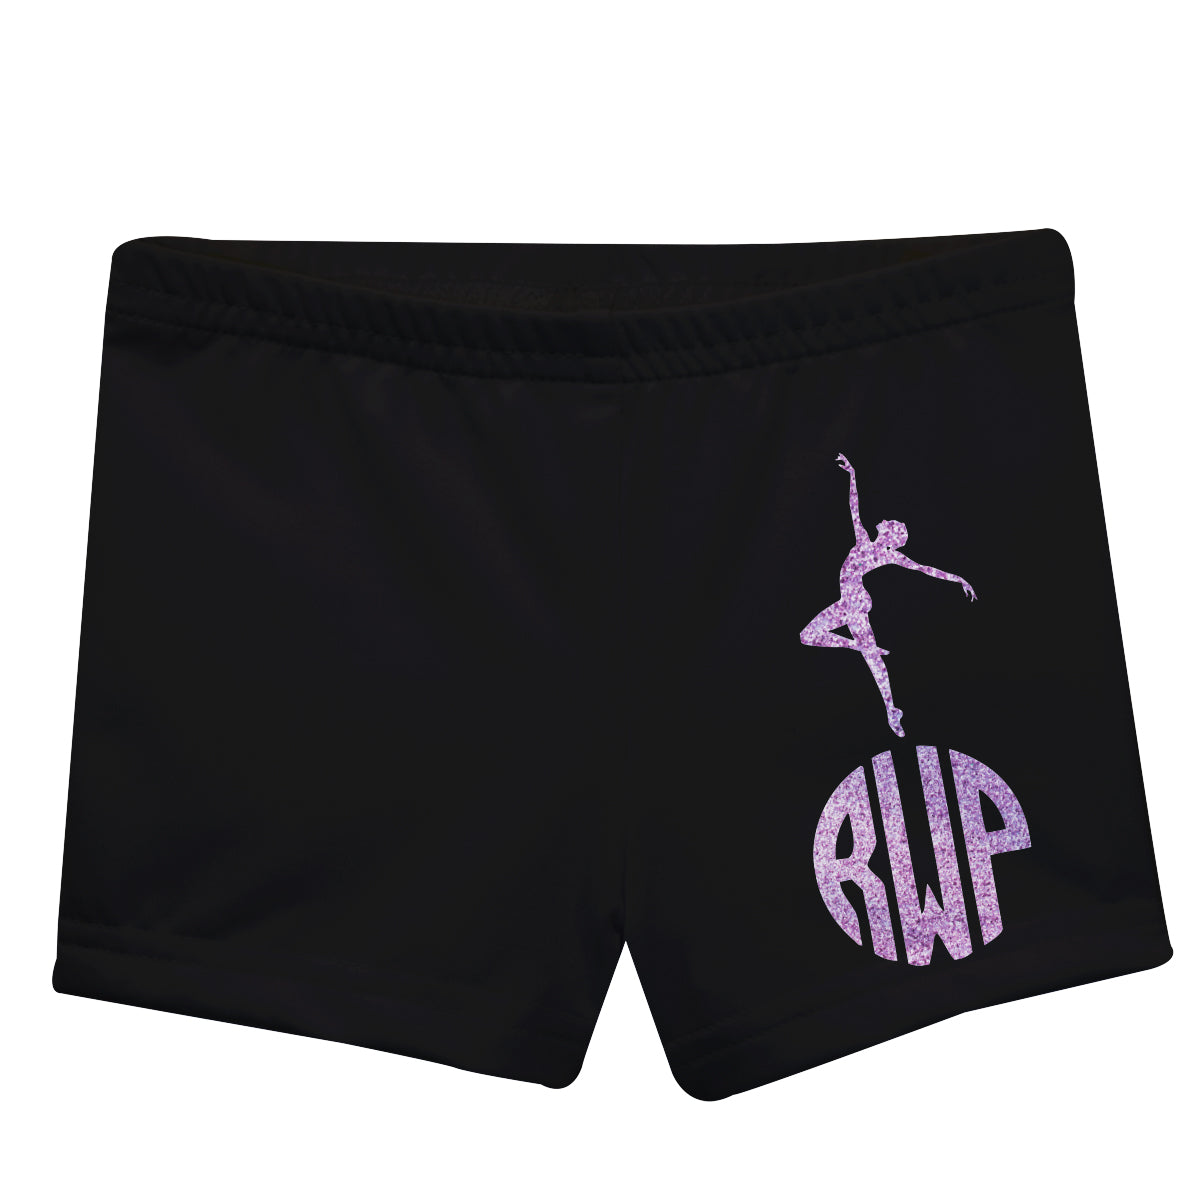 Black and purple gymnast shorts with monogram - Wimziy&Co.